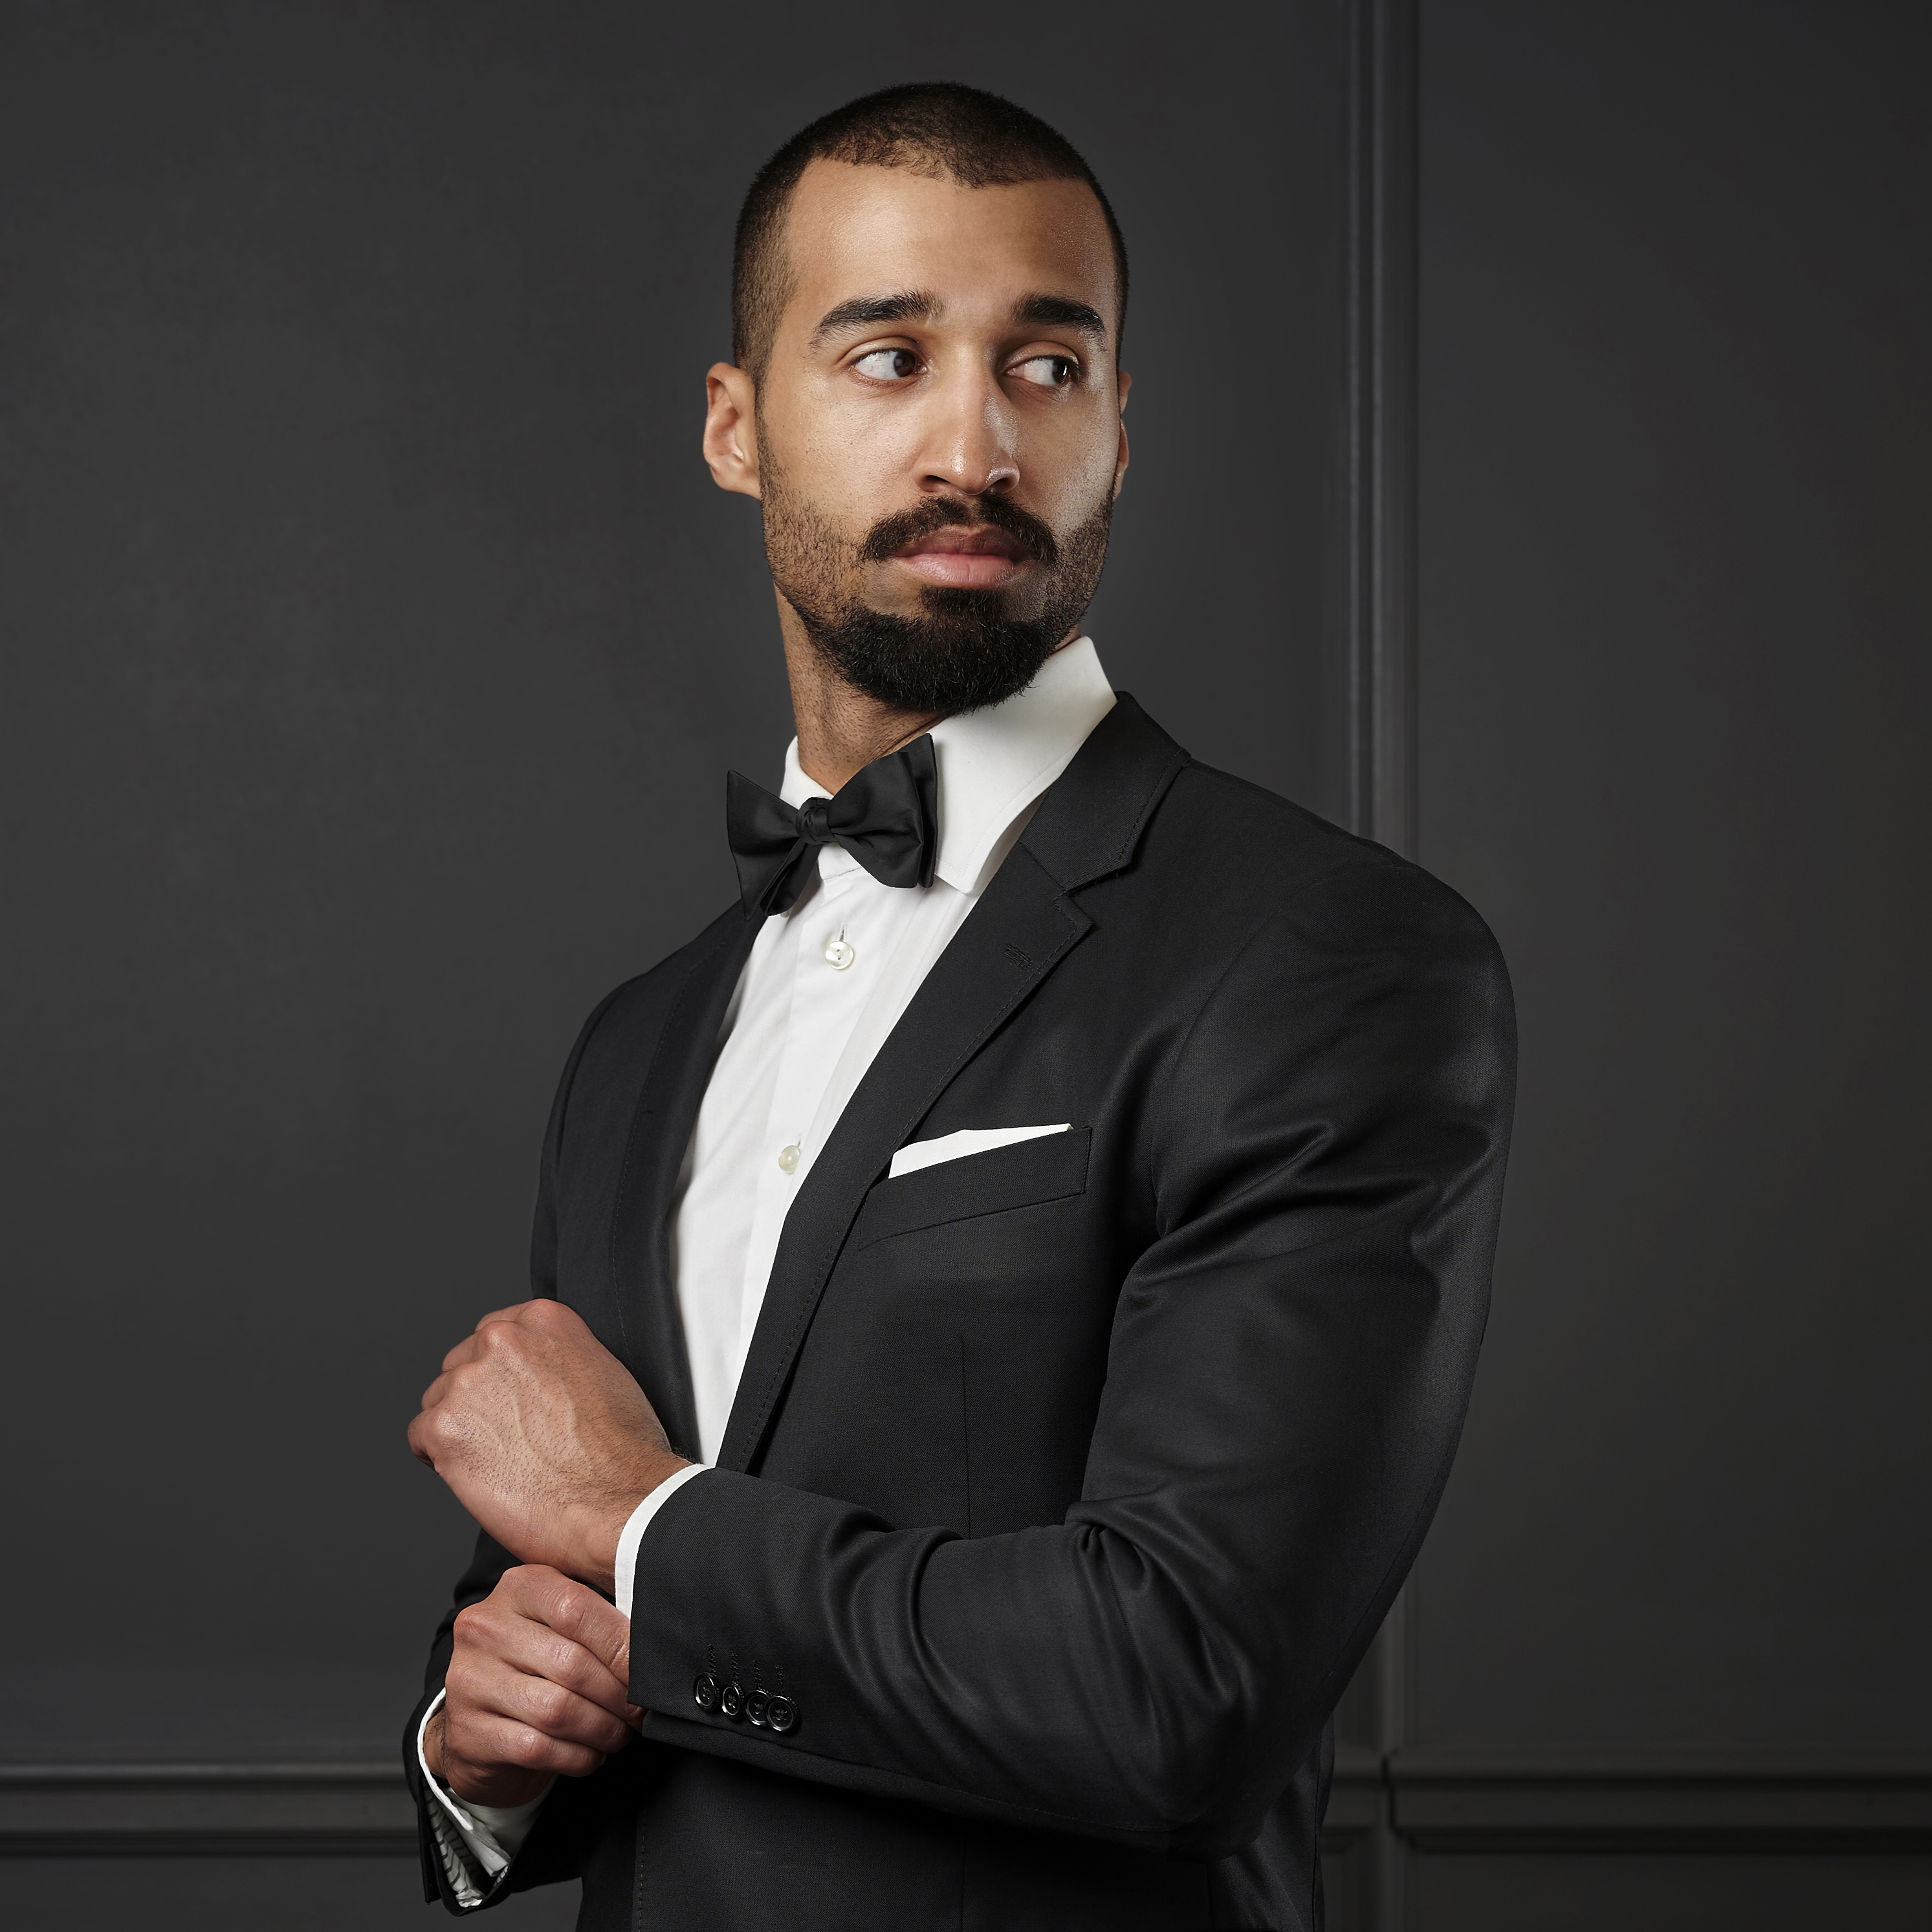 Tips for Choosing the Right Bow Tie